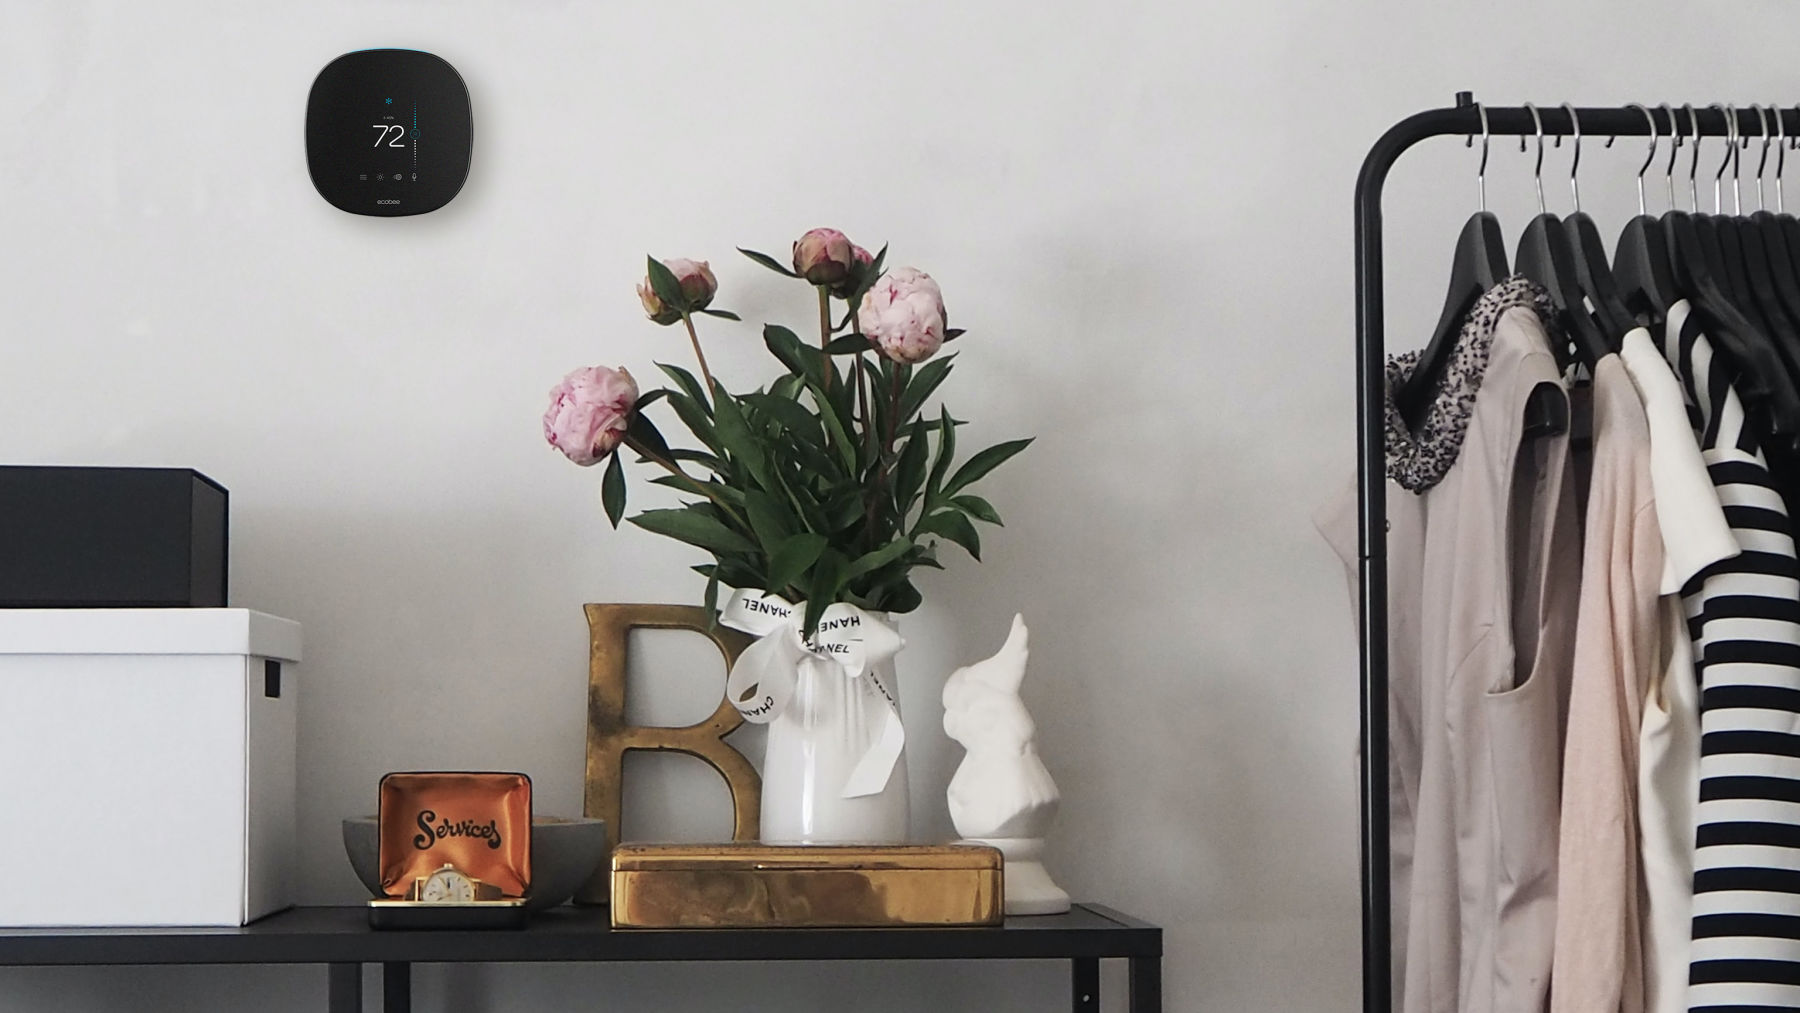 ecobee thermostat on the wall set next to flowers in vase